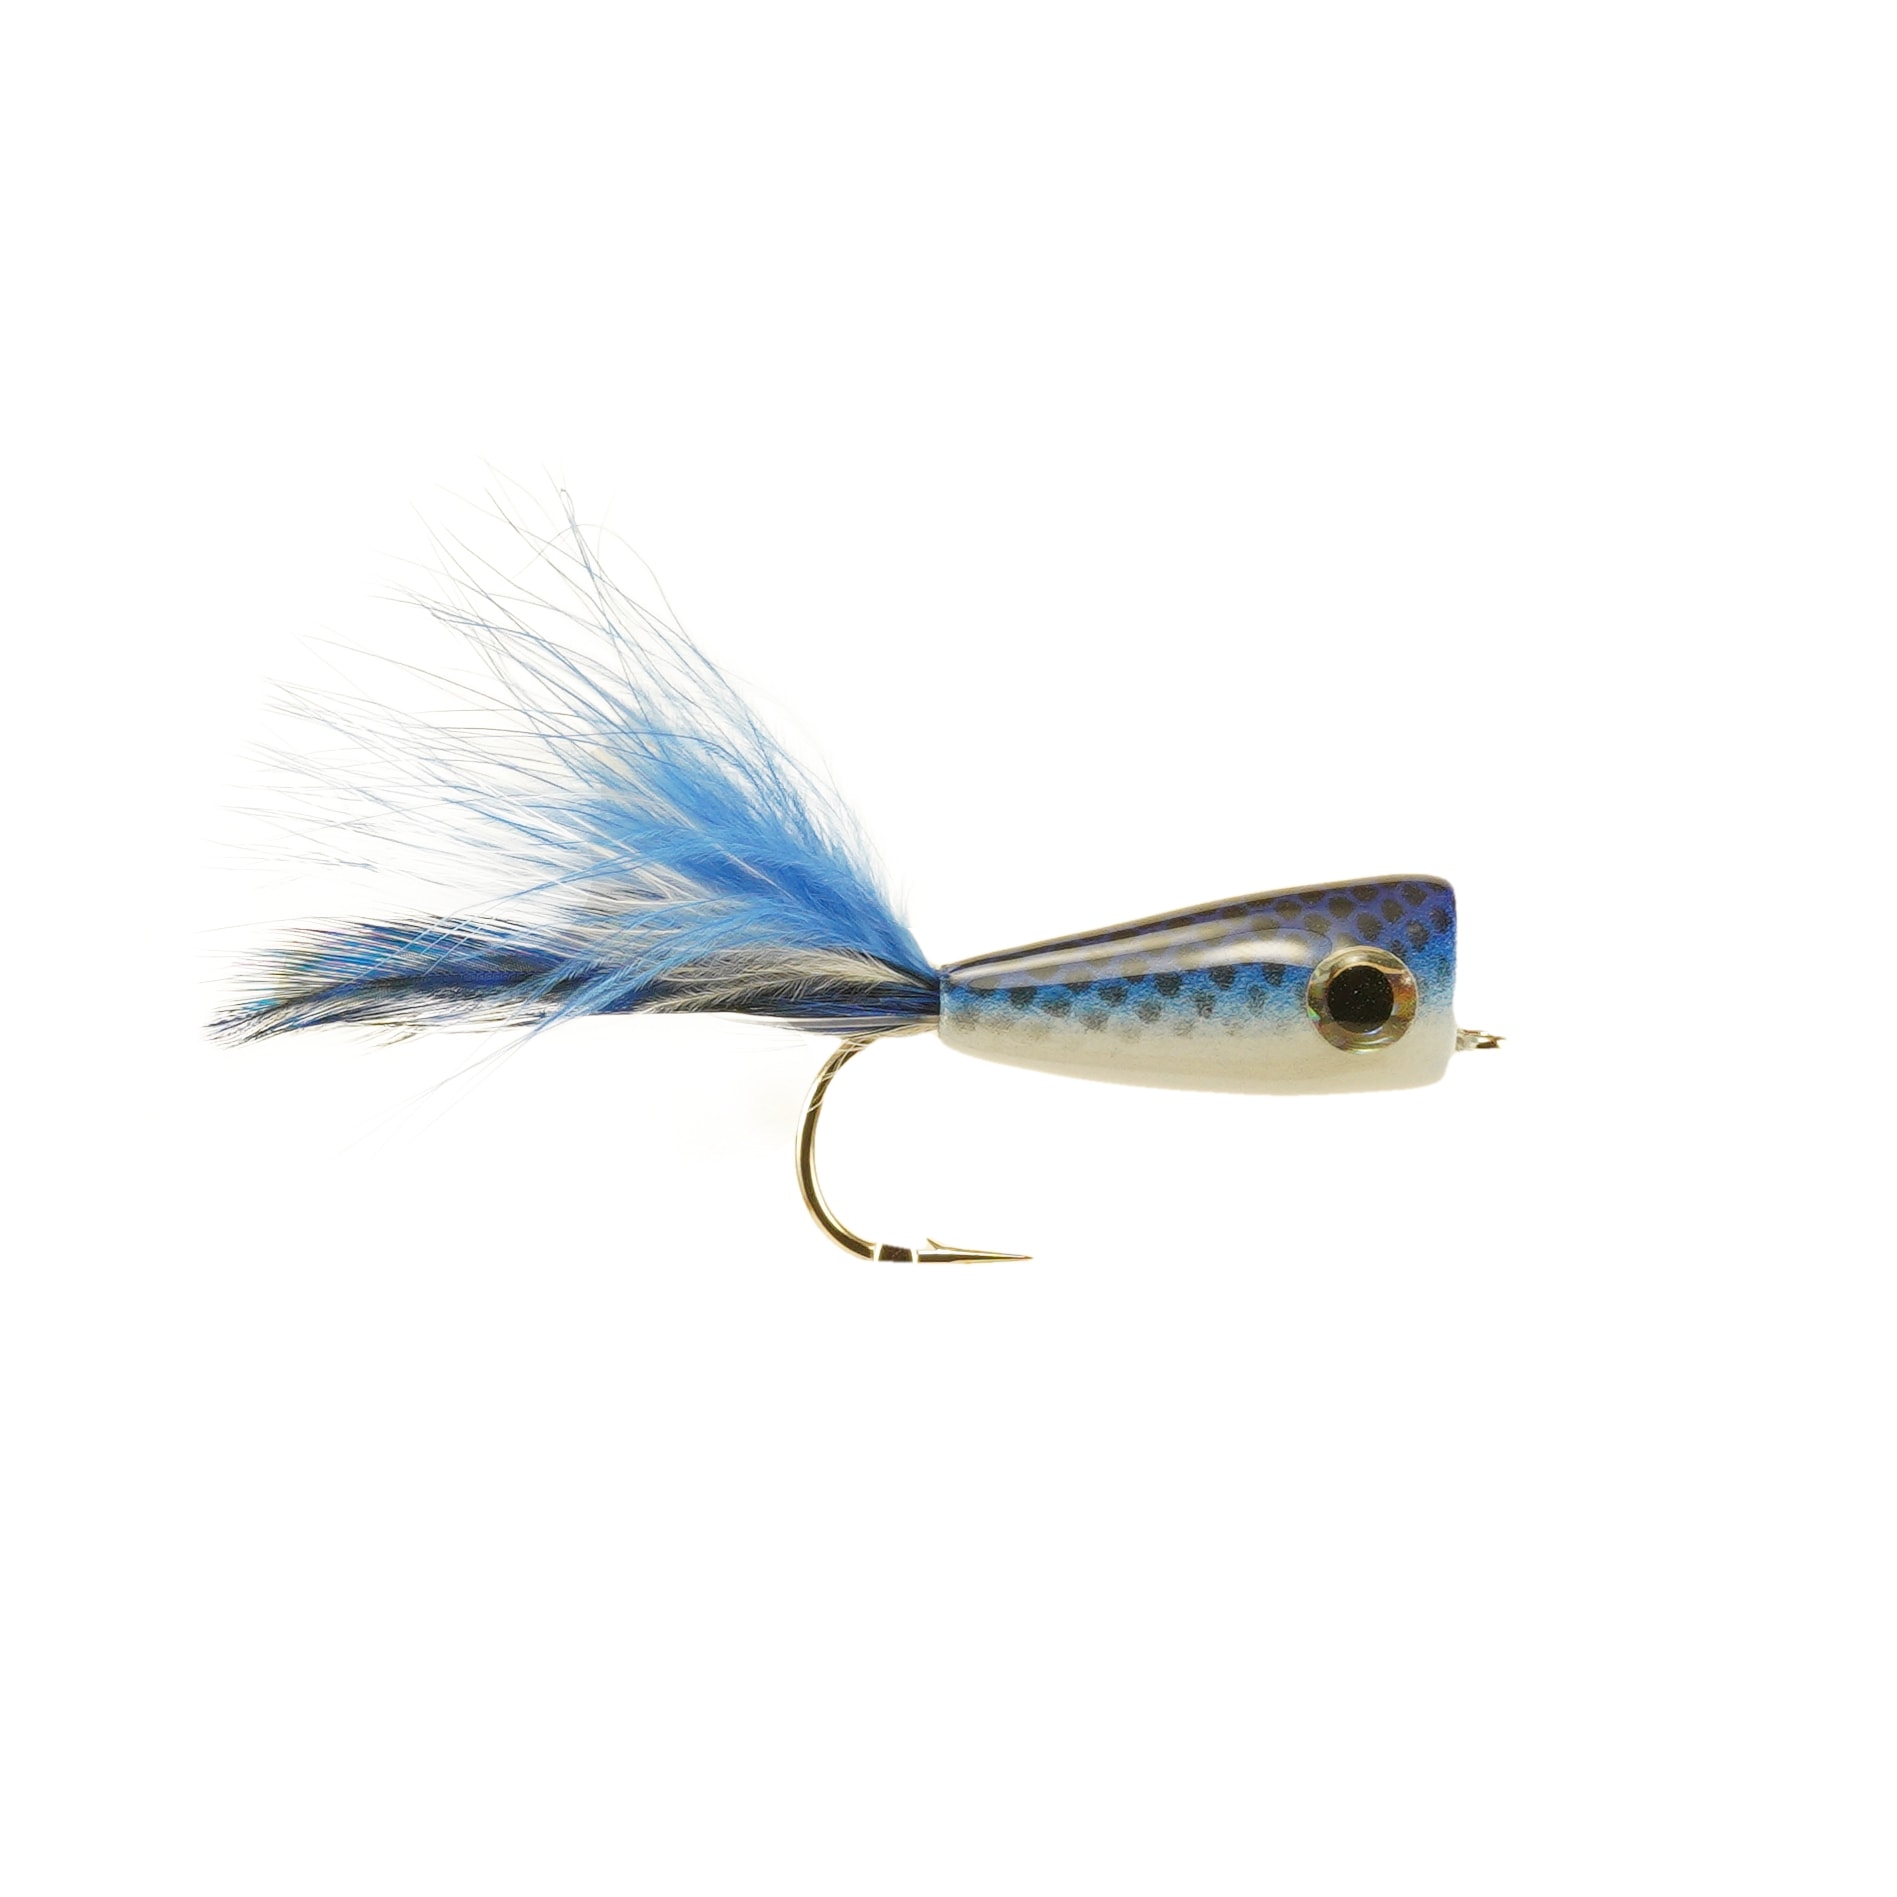 Bluewater Mirage Inshore/Offshore Popper Fly - GT Popper Fly